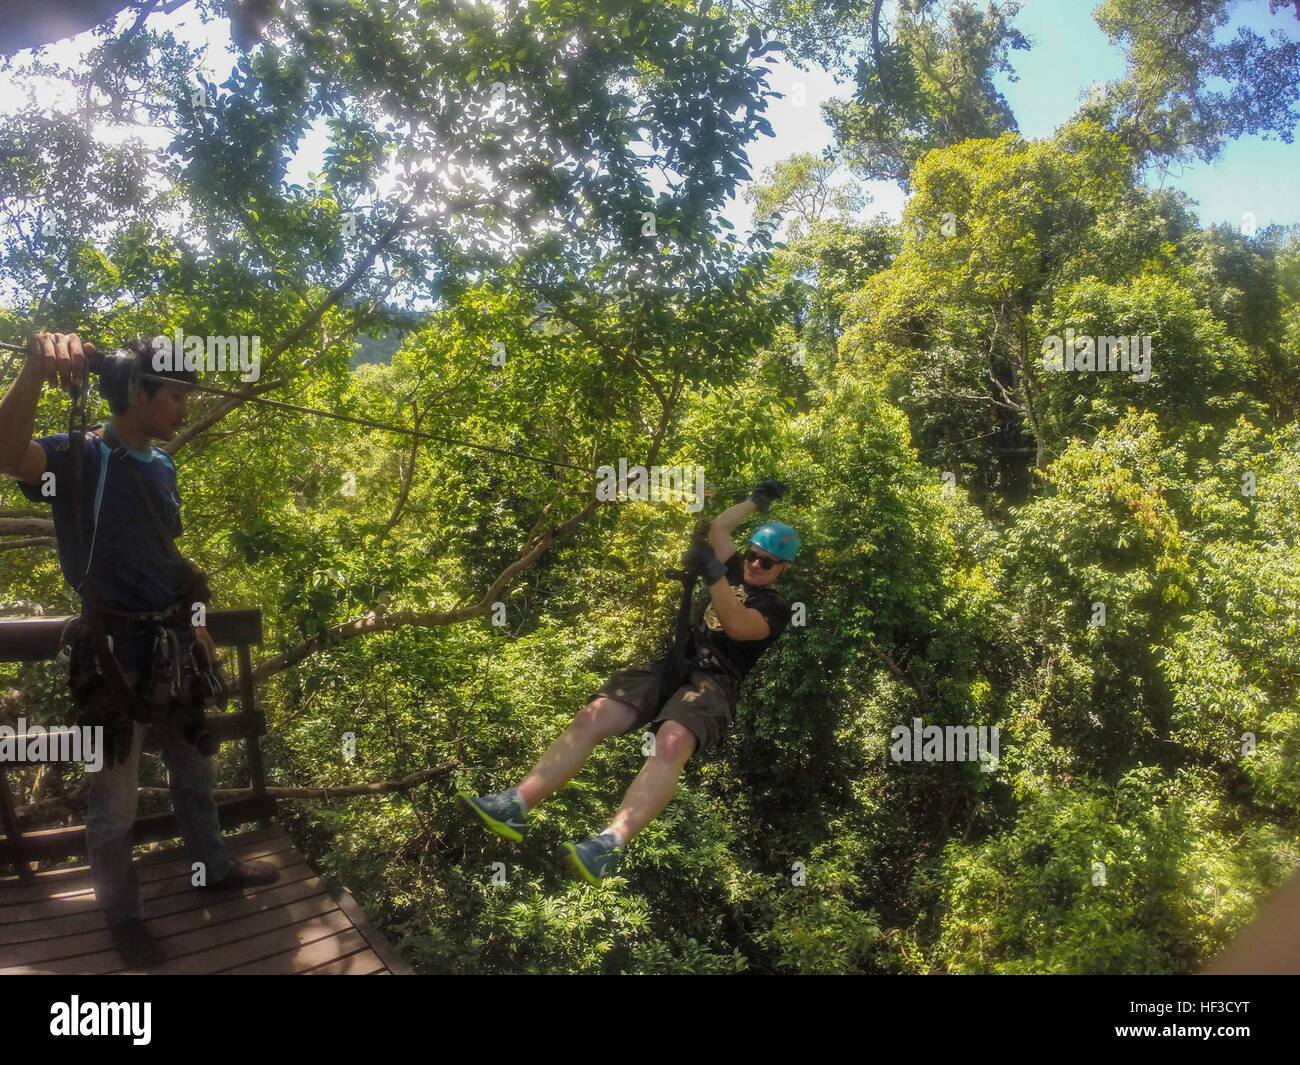 A U.S. Marine with the 15th Marine Expeditionary Unit participates in a zip-line tour through the jungles of Pattaya Beach, Thailand, June 10, 2015.  Marines and Sailors aboard the USS Anchorage (LPD 23) enjoyed various leisure activities during a port visit in Thailand. (U.S. Marine Corps photo by Sgt. Jamean Berry/Released) U.S. Marines, Sailors explore Thailand during port visit 150610-M-GC438-007 Stock Photo